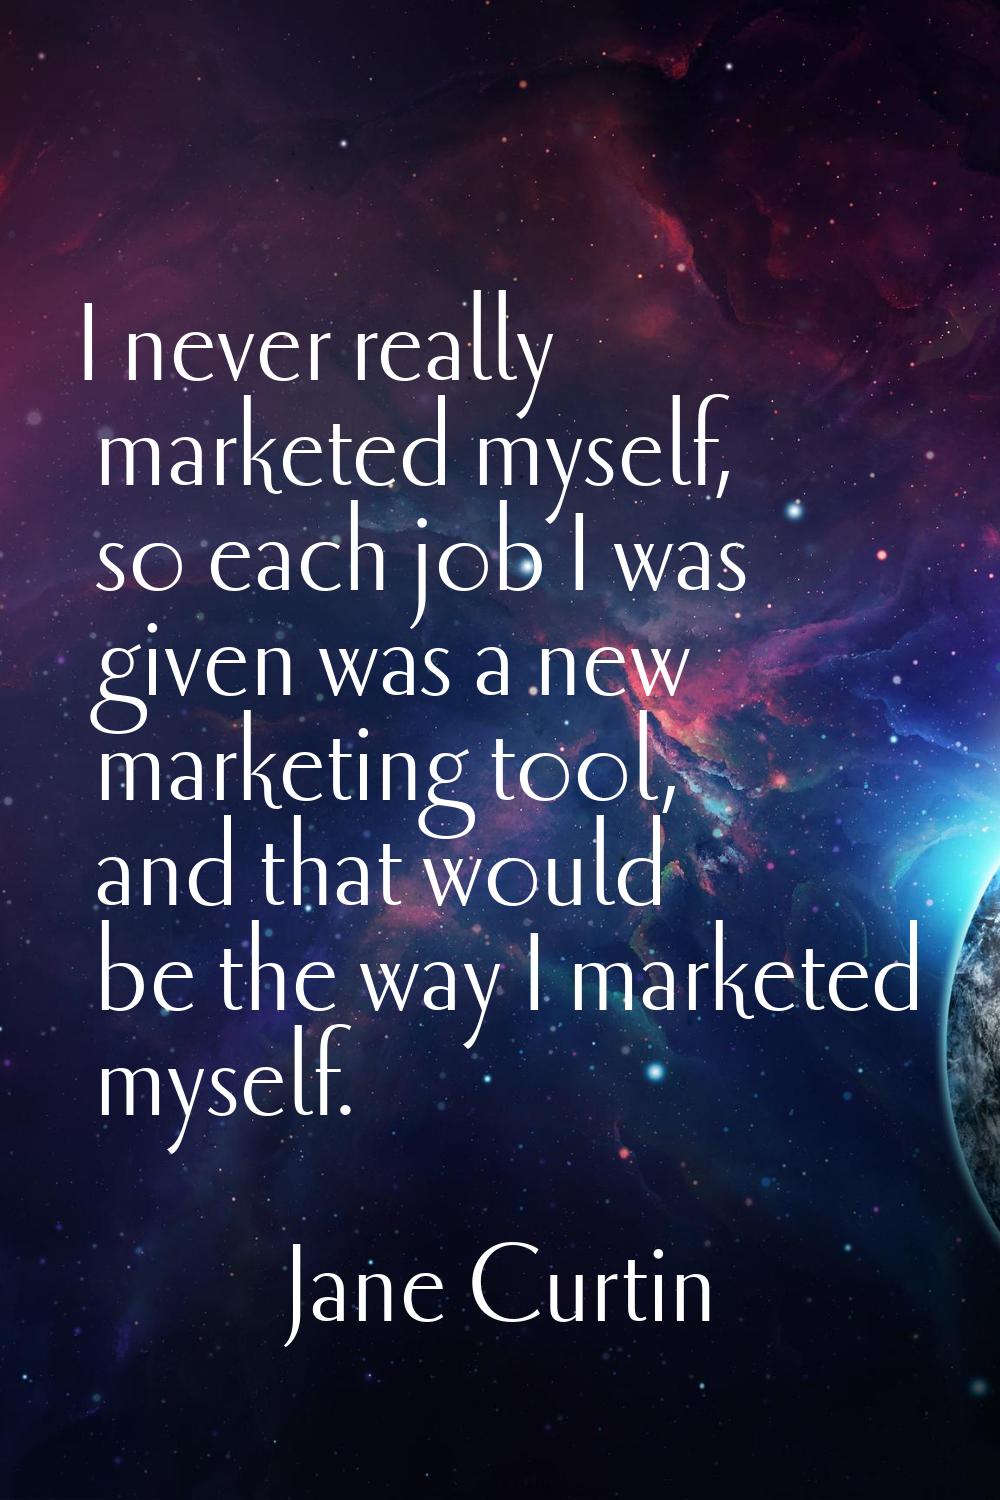 I never really marketed myself, so each job I was given was a new marketing tool, and that would be